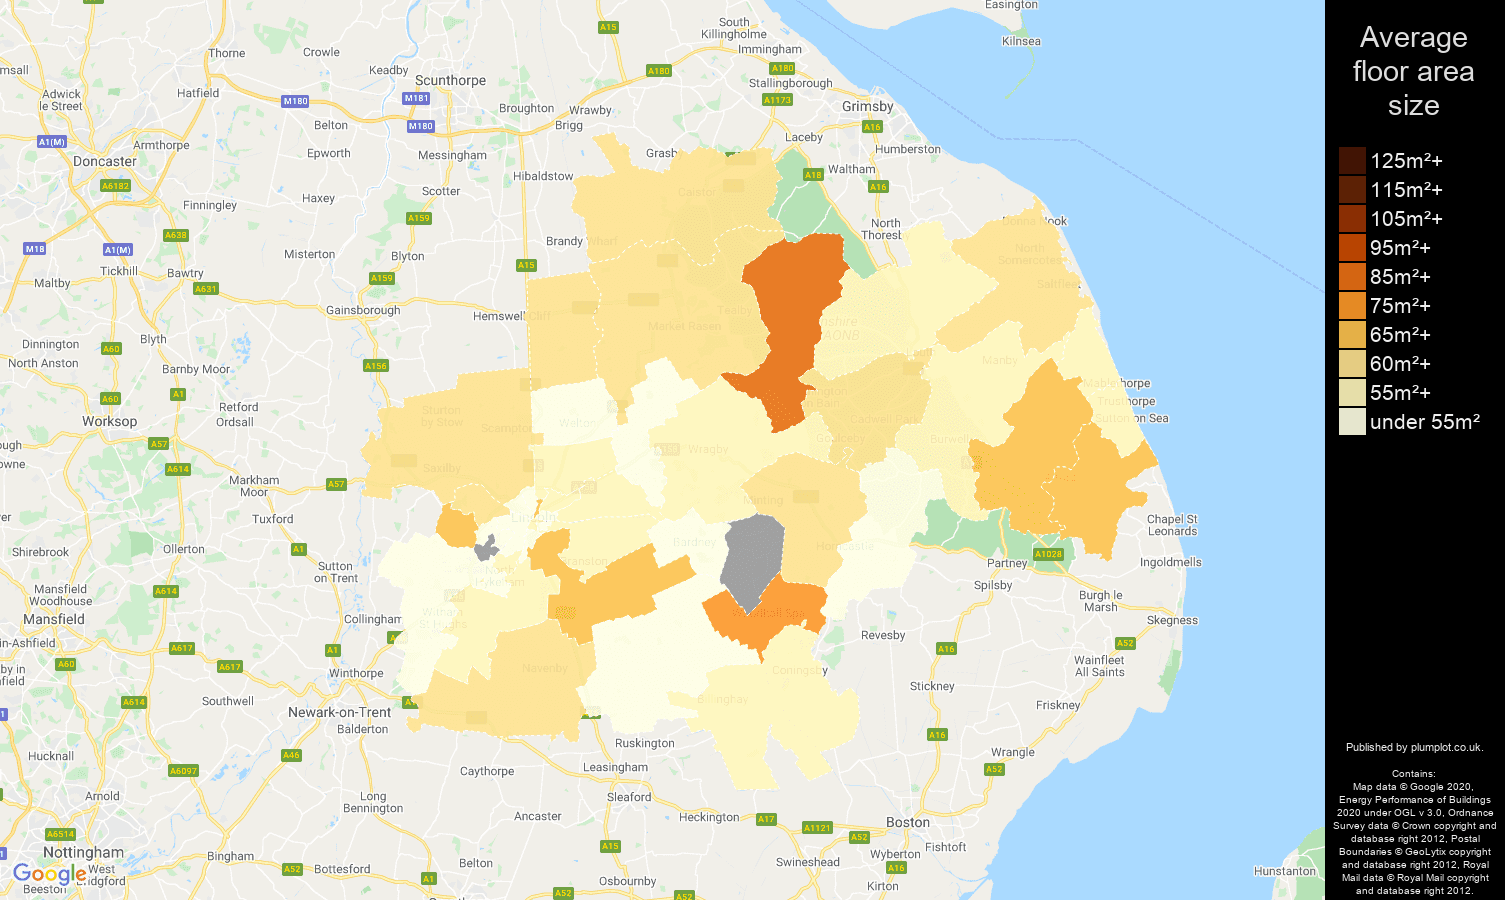 Lincoln map of average floor area size of flats